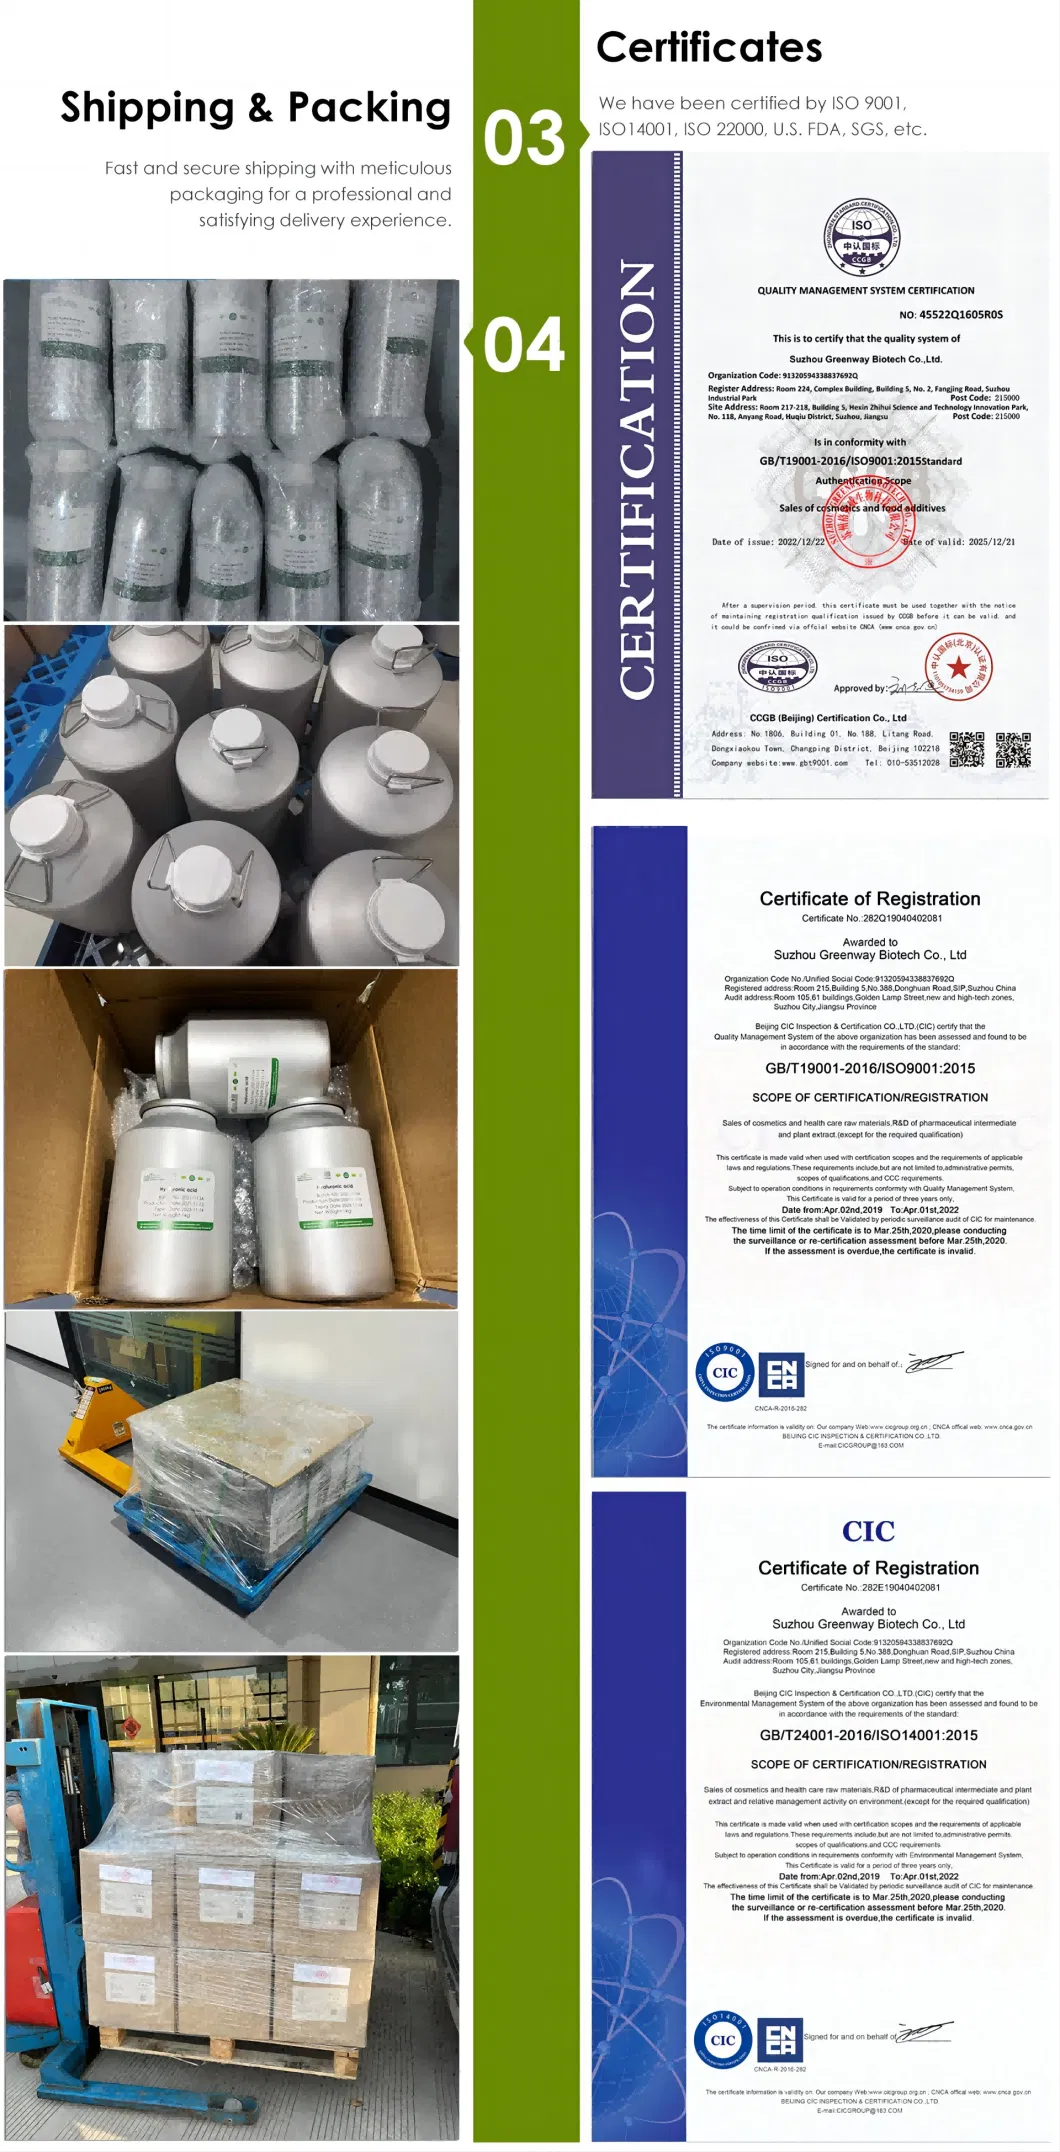 High Purity Cosmetic and Flavors Fragrances Bulk Price CAS 110-27-0 Ipm/Isopropyl Myristate